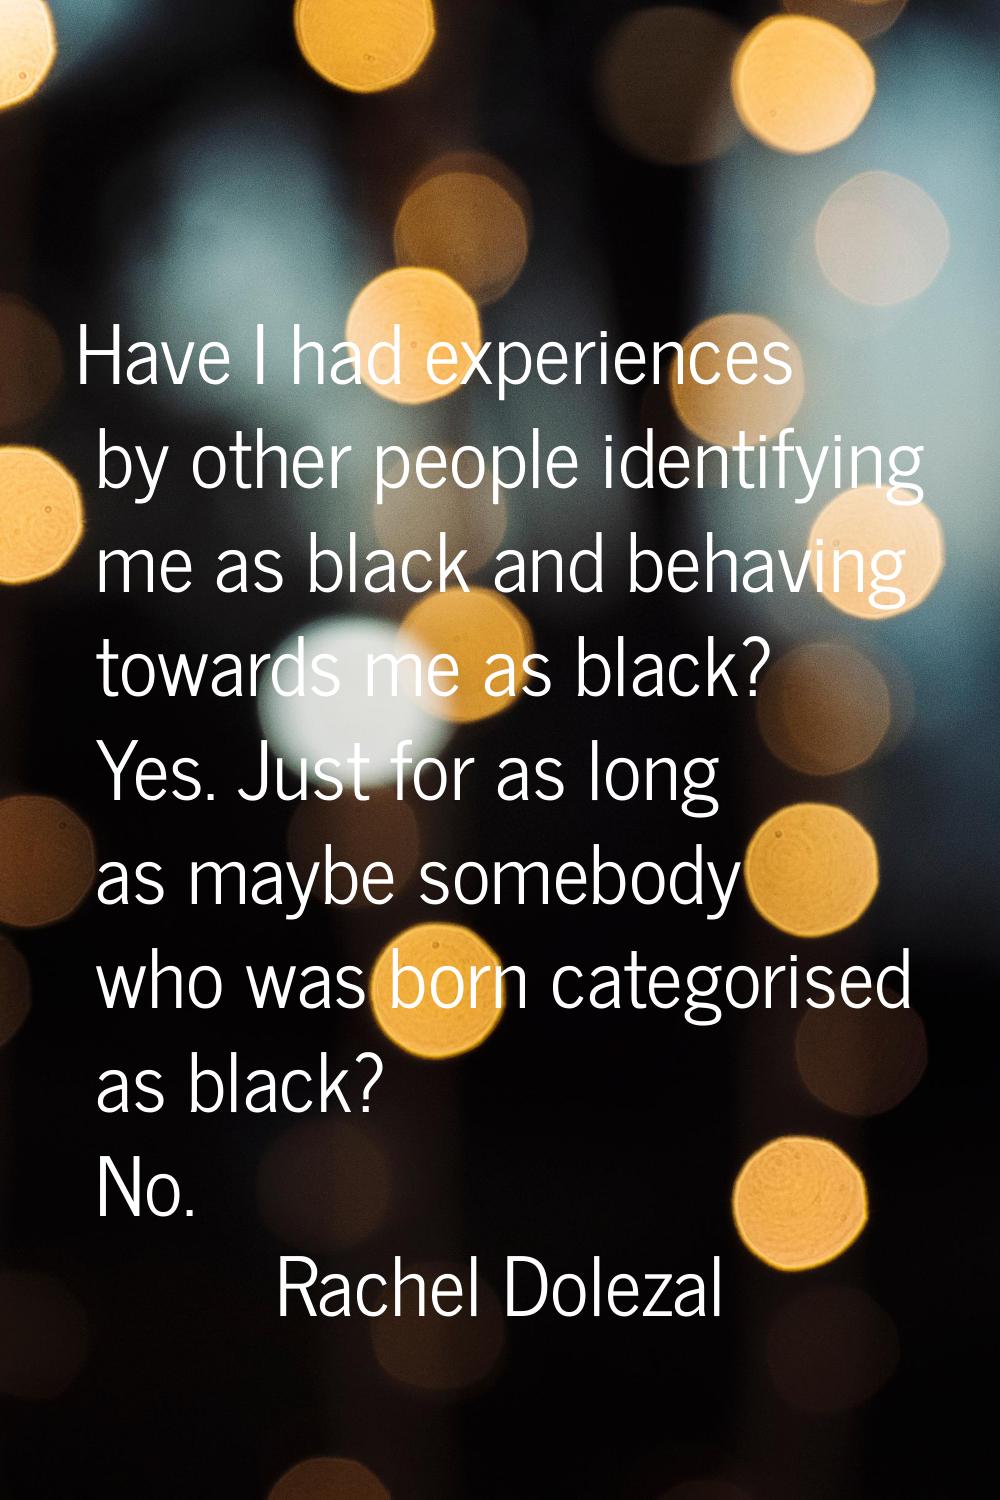 Have I had experiences by other people identifying me as black and behaving towards me as black? Ye